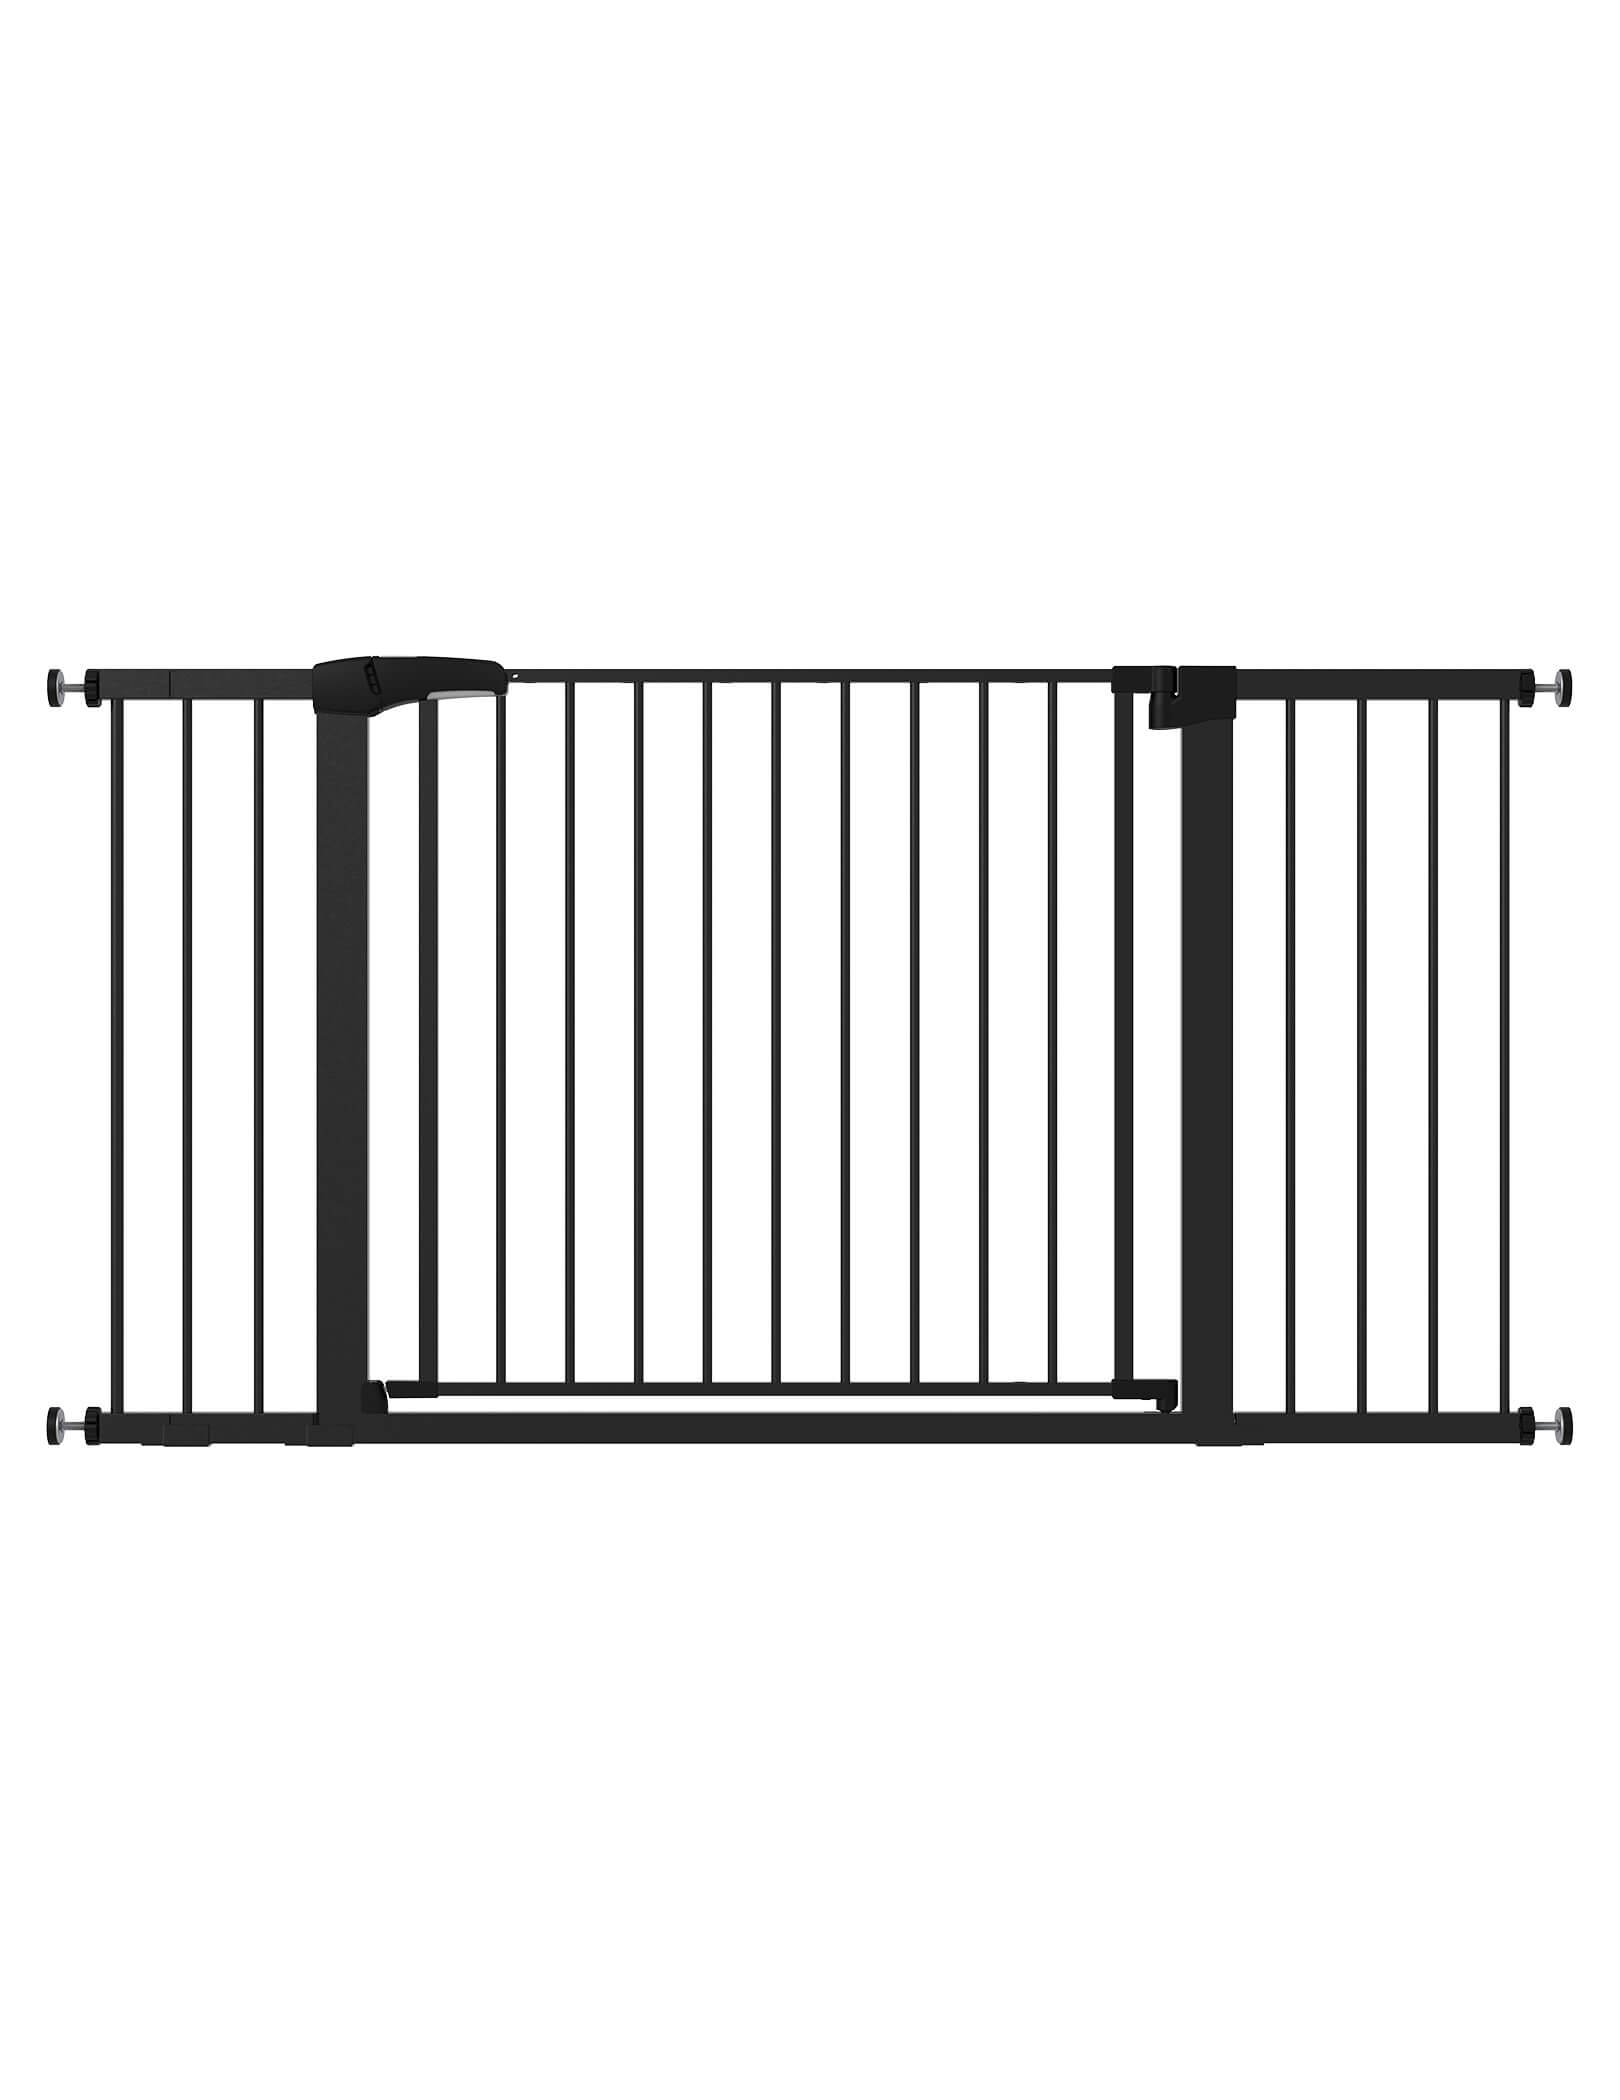 BABELIO 36-57" Auto-Close Baby and Pet Gate, Large Walk-Through, Pressure-Mounted Safety Gate